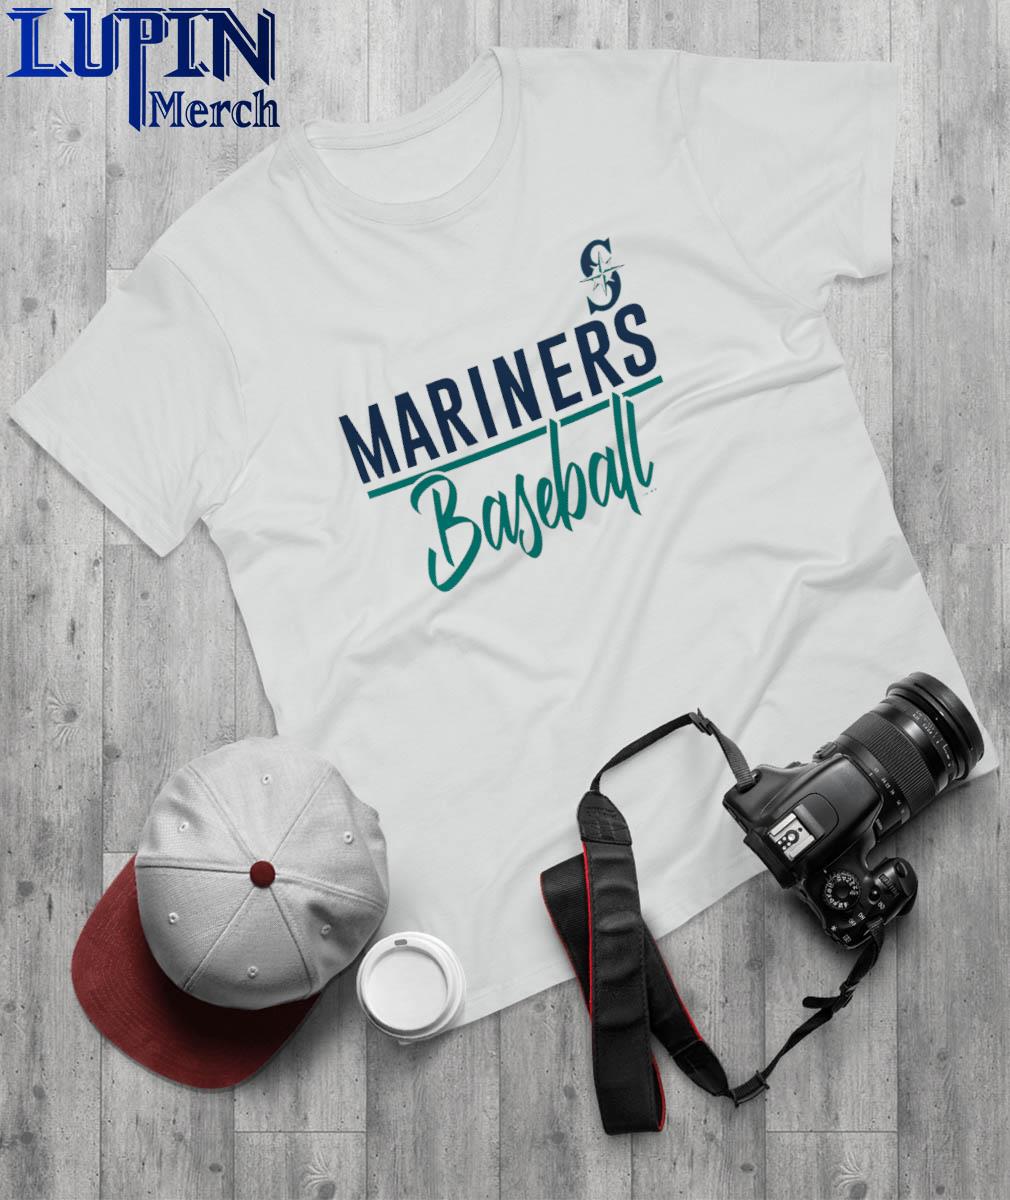 Official seattle mariners g-iii 4her by carl banks team graphic